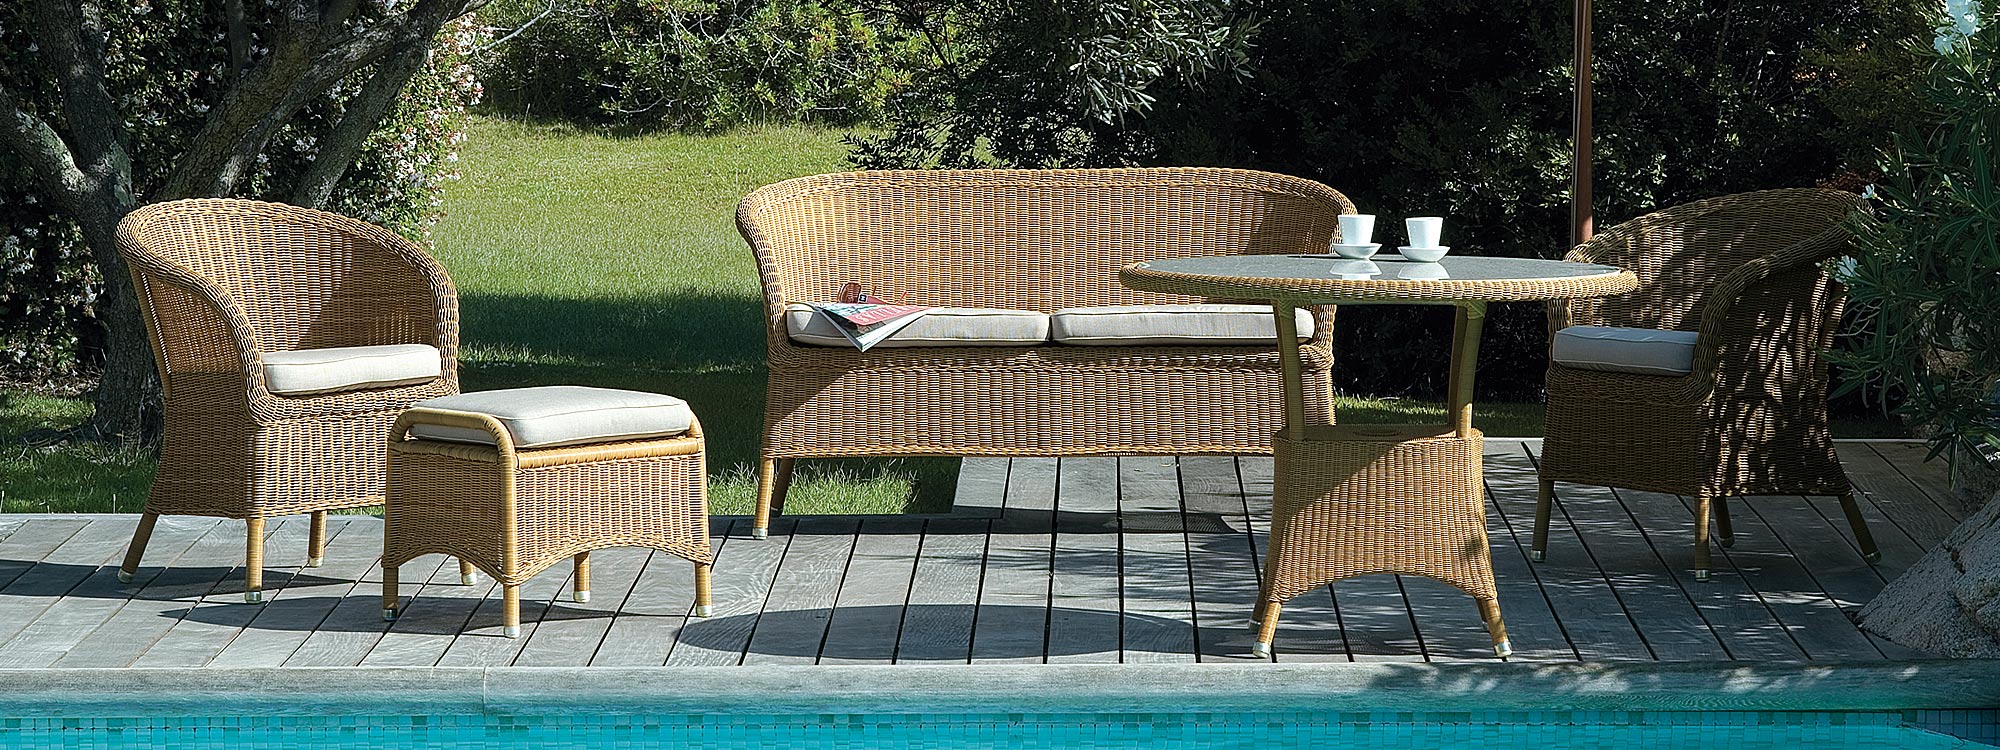 Derby rattan armchair is a classic garden chair in top quality garden furniture materials by Caneline cane furniture company - Denmark.